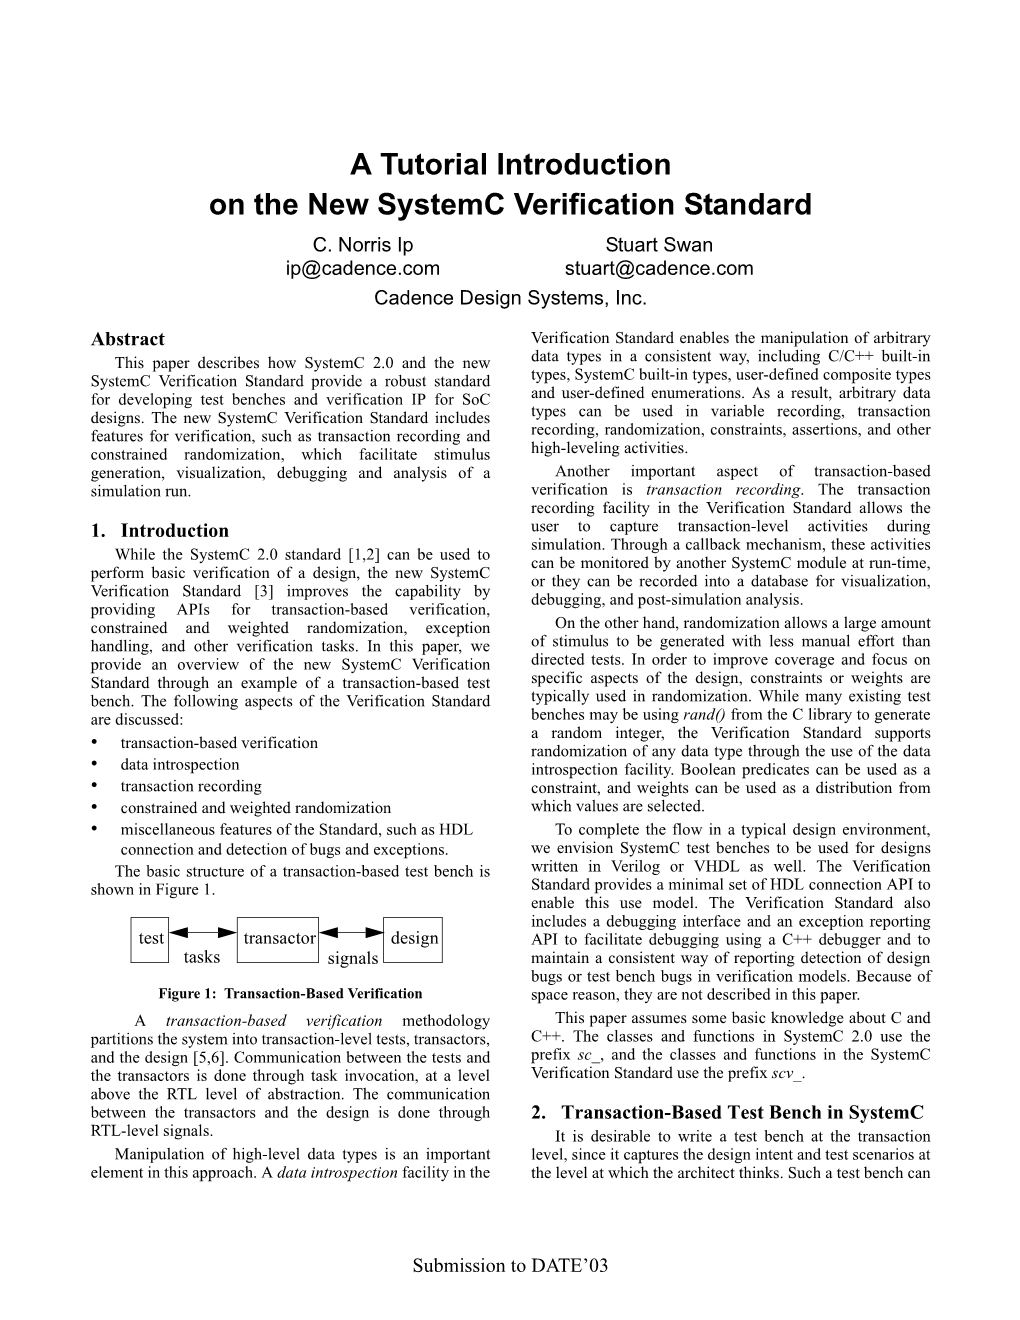 A Tutorial Introduction on the New Systemc Verification Standard C